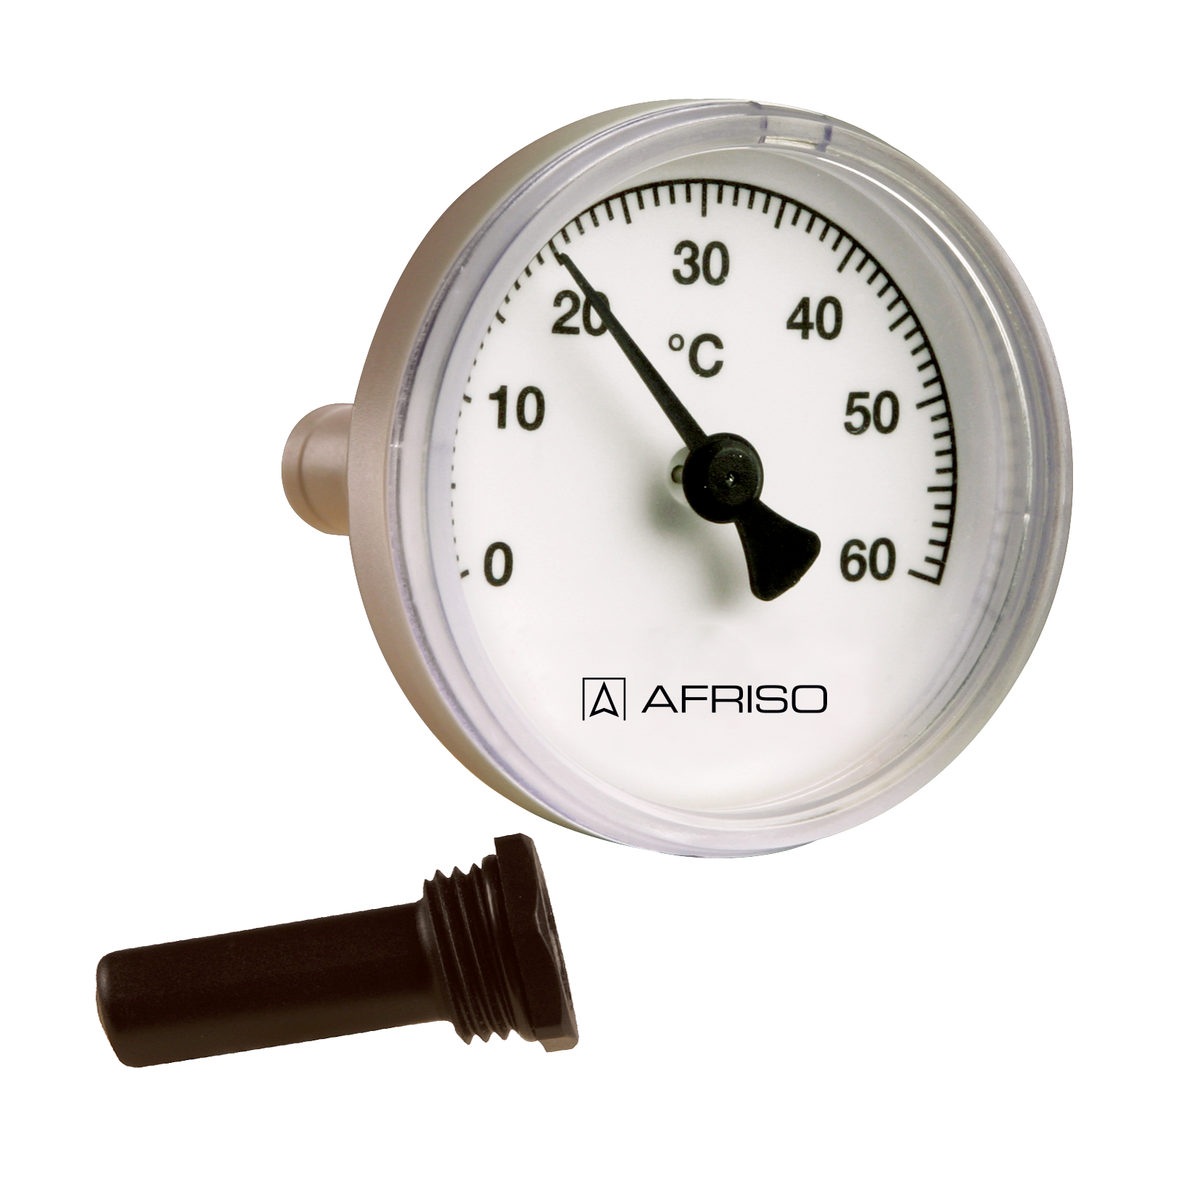 AFRISO Bimetall-Thermometer BiTh 50 K 0/60C 40mm 1/2 axial Kl.2 SAL 87670 object_image_57154imagemain_en